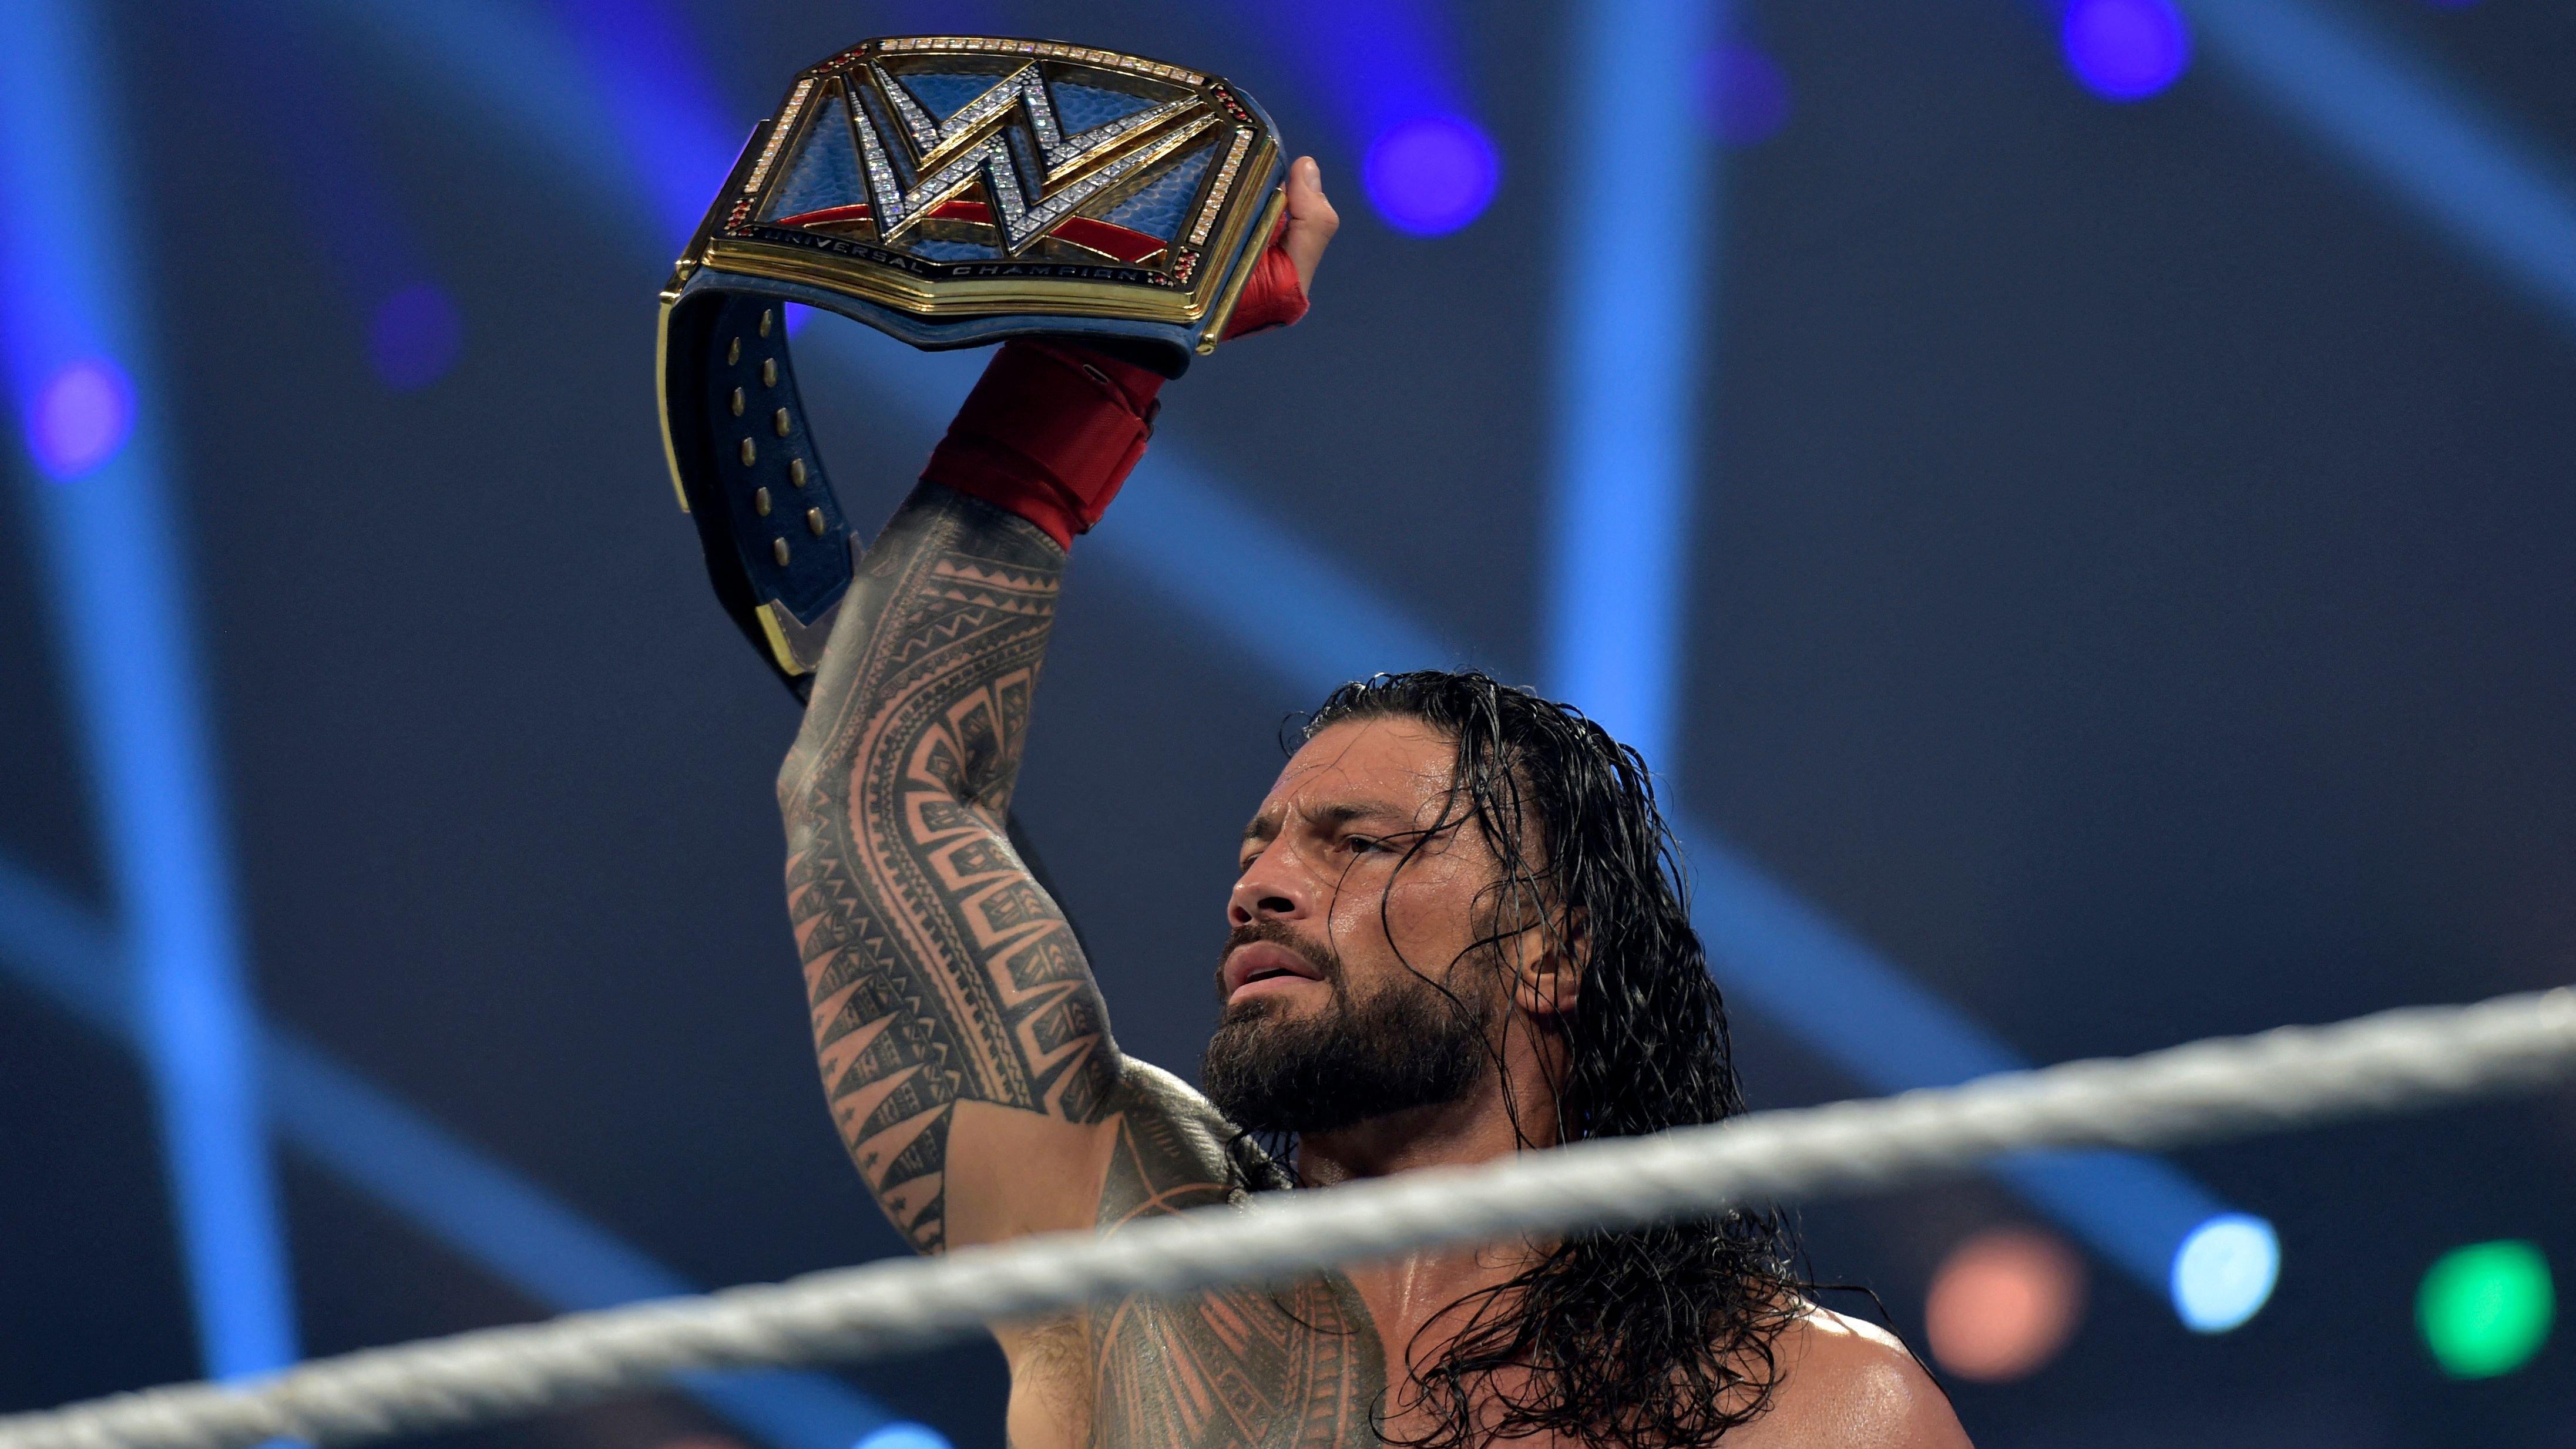 Roman Reigns holding the Universal Championship belt overhead in the WWE ring